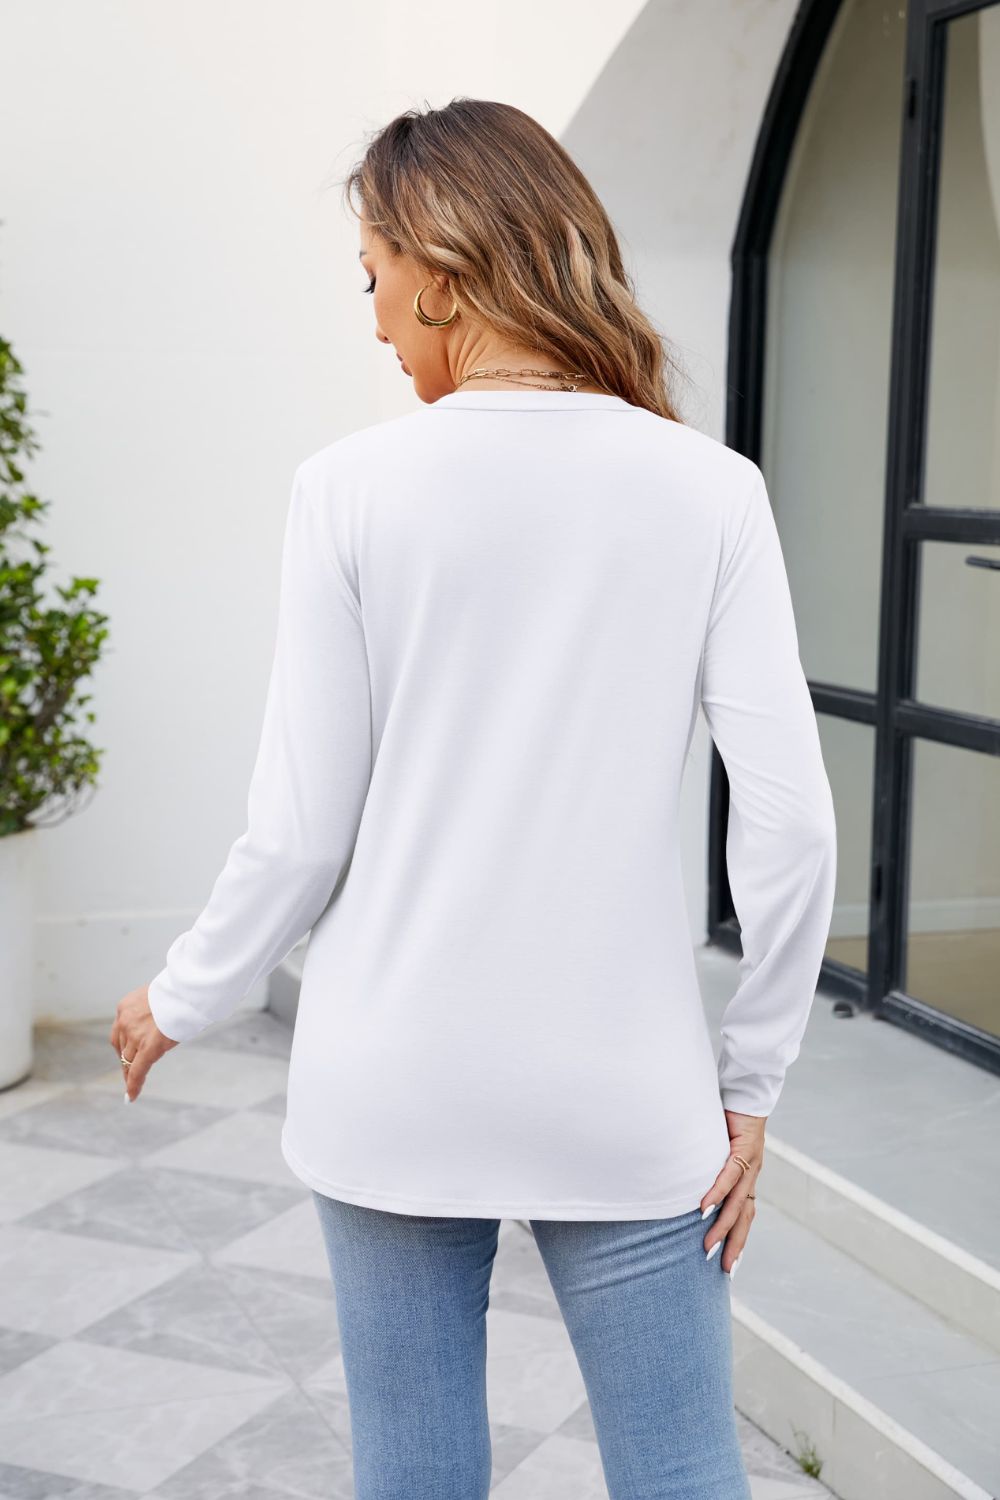 V-Neck Ruched Long Sleeve Blouse - Women’s Clothing & Accessories - Shirts & Tops - 6 - 2024